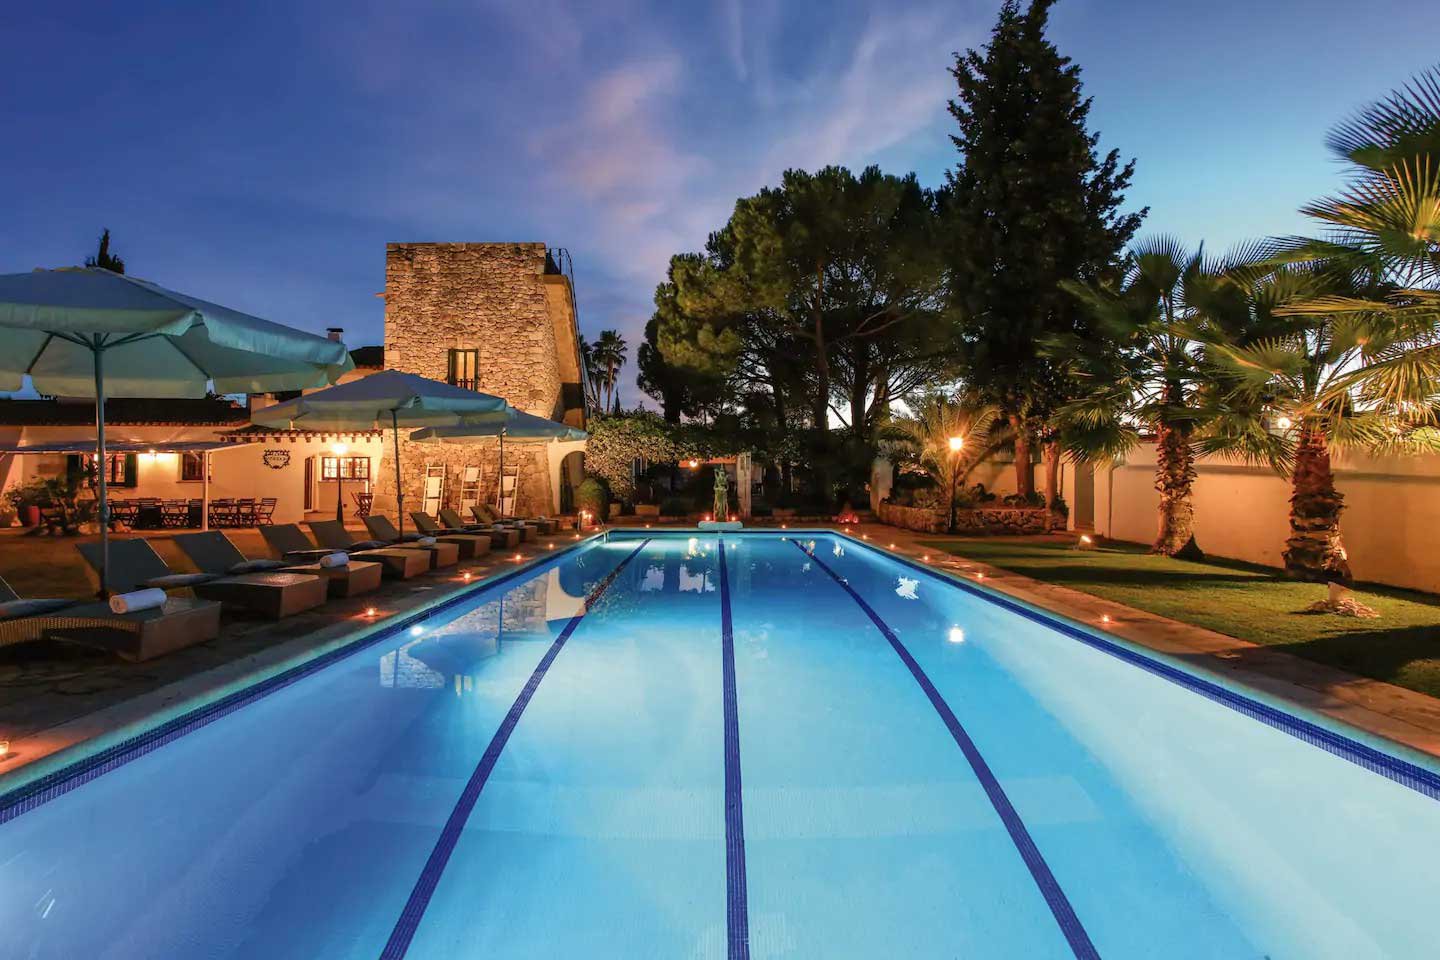 Sitges Villas, 7 amazing locations perfect for Special Occasions